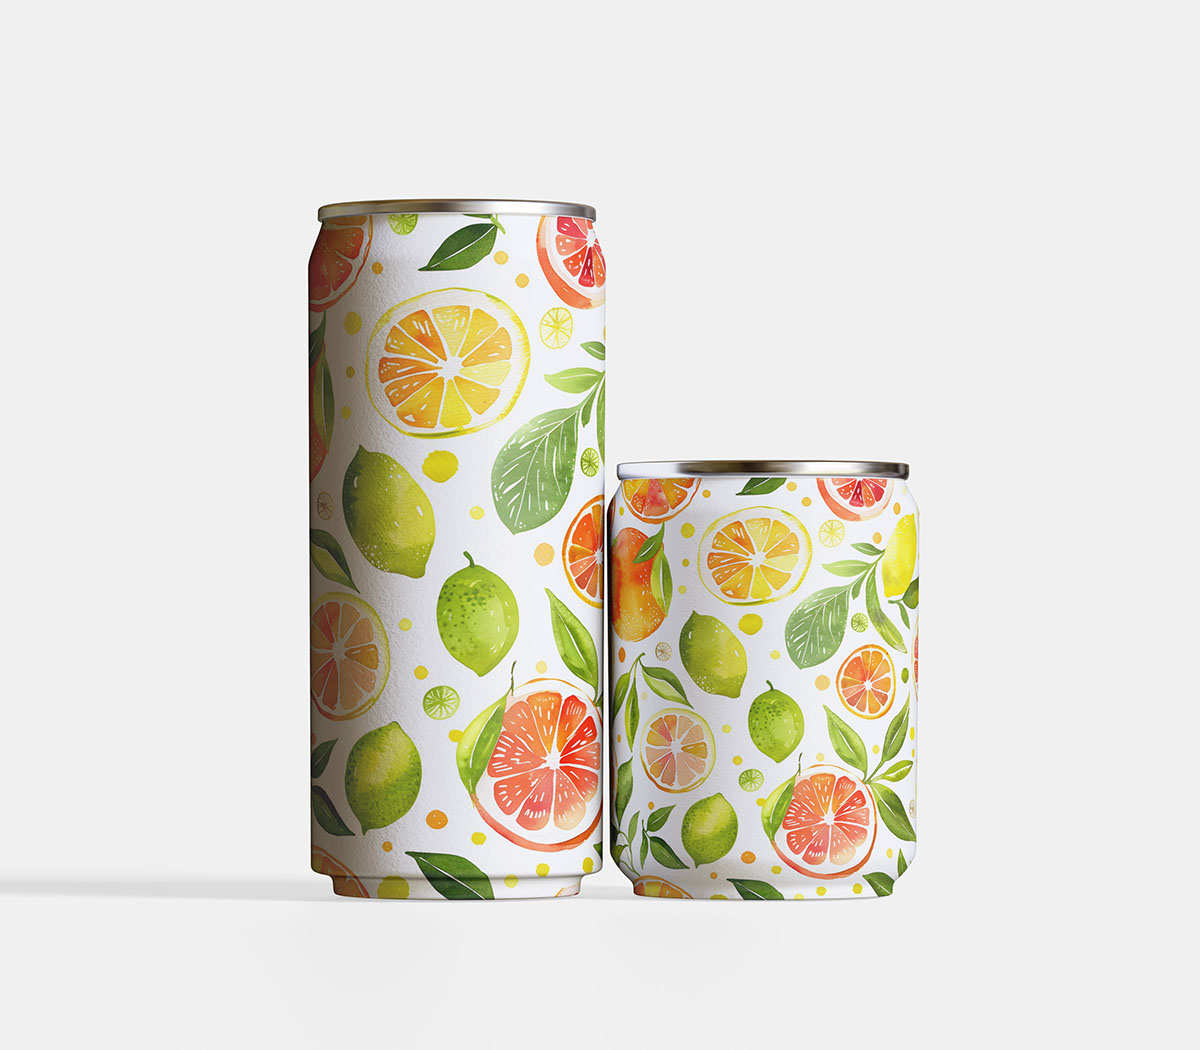 Soda can mockup isolate on white background rendition image